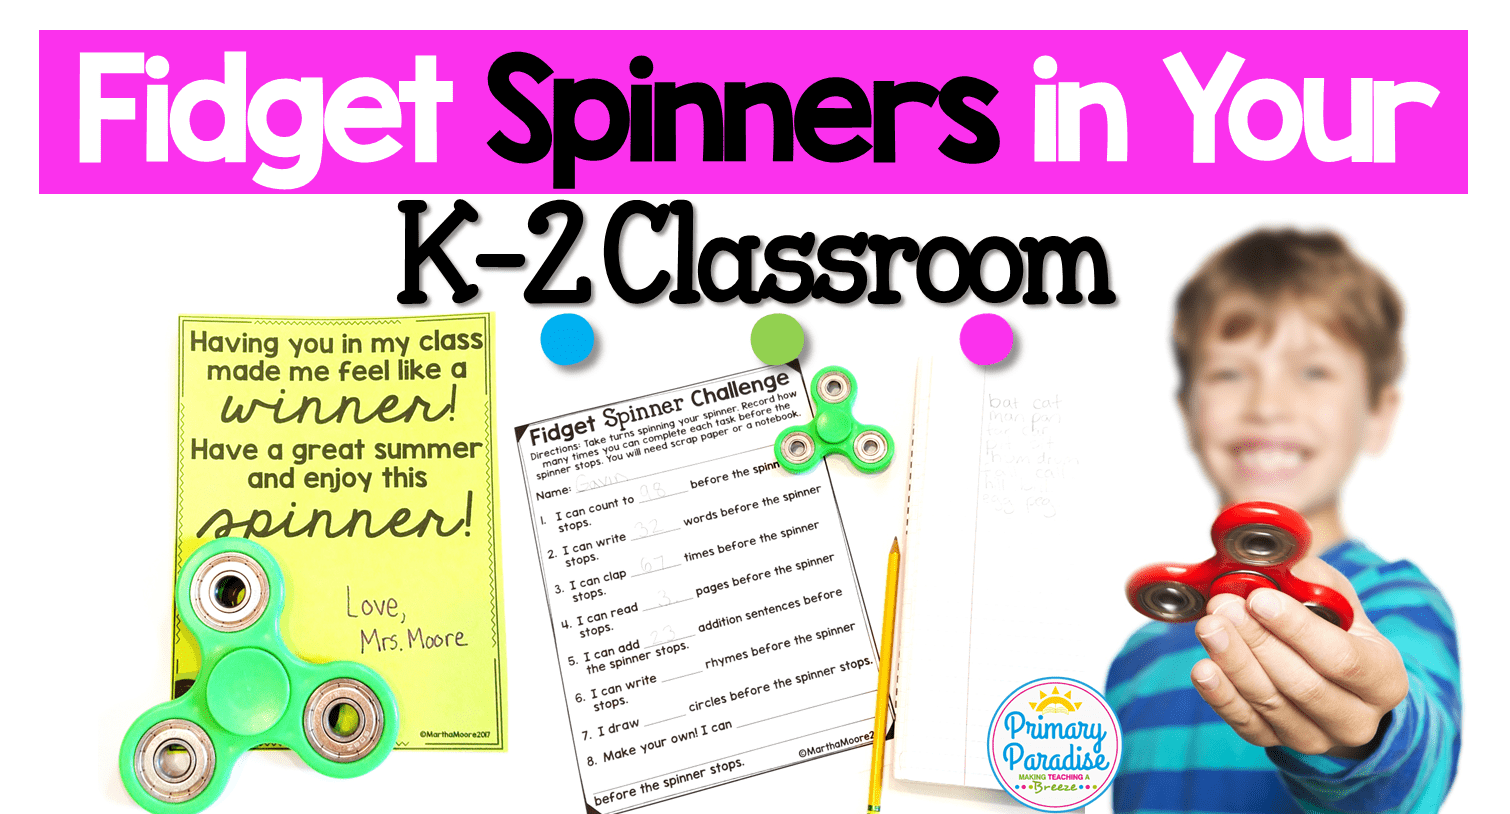 WOULD YOU RATHER SPINNER: Free Morning Meeting Activity